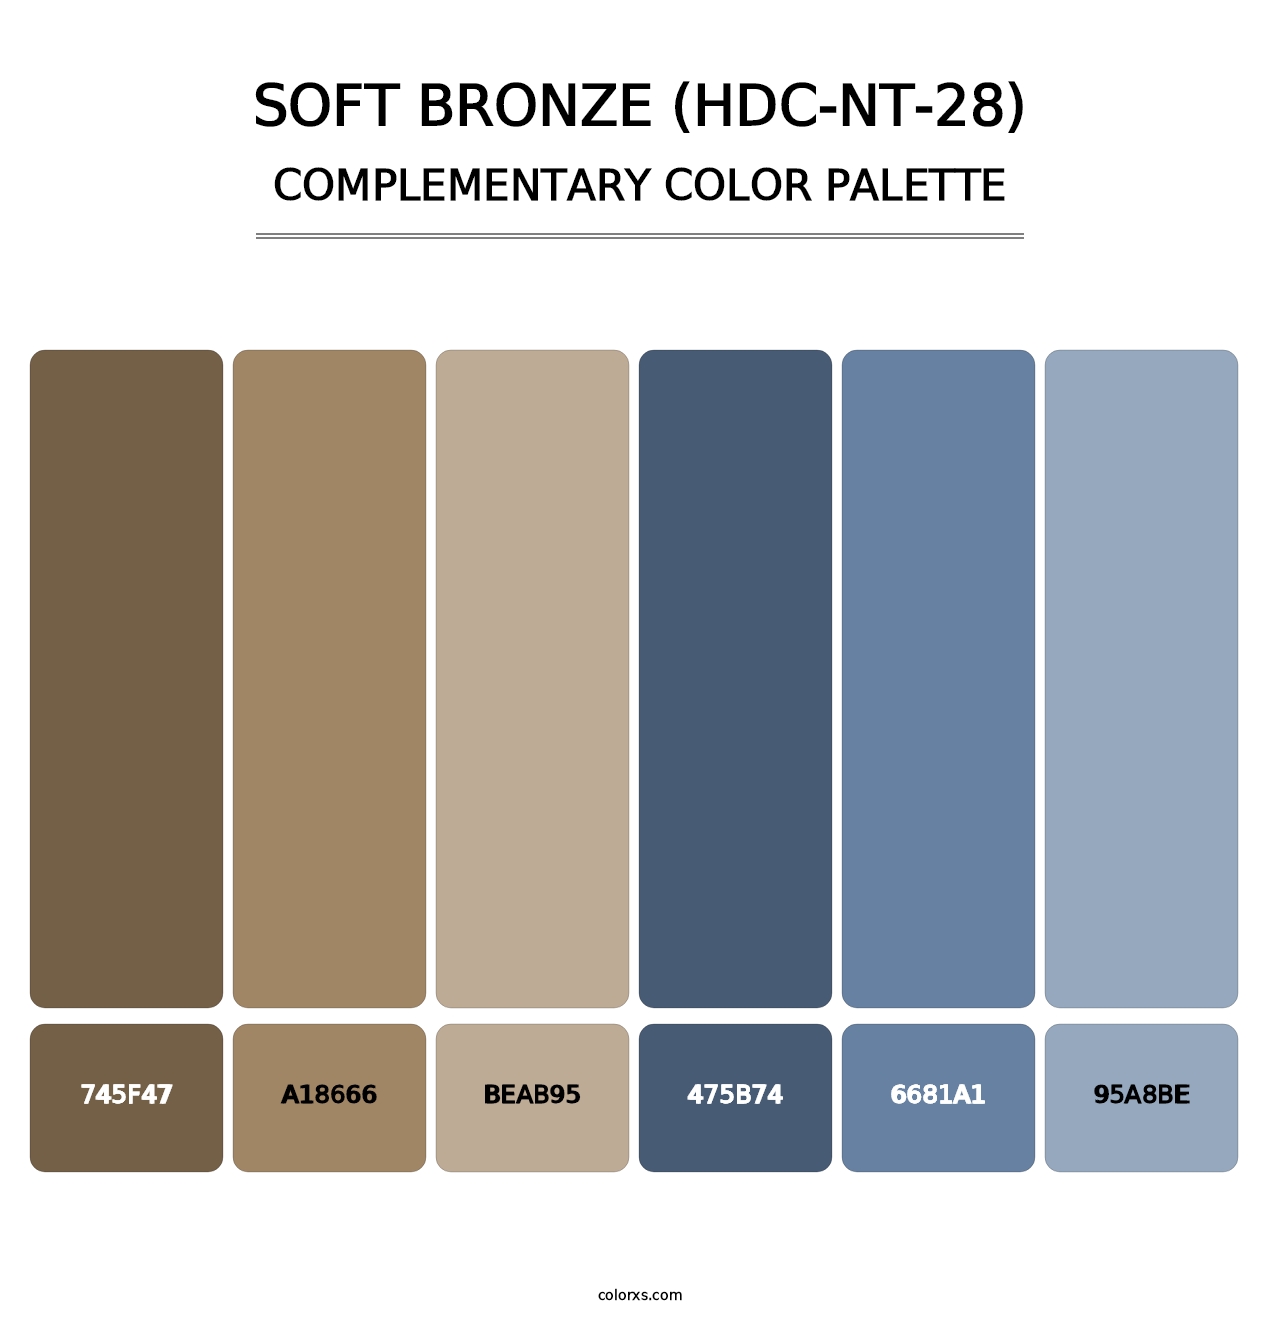 Soft Bronze (HDC-NT-28) - Complementary Color Palette